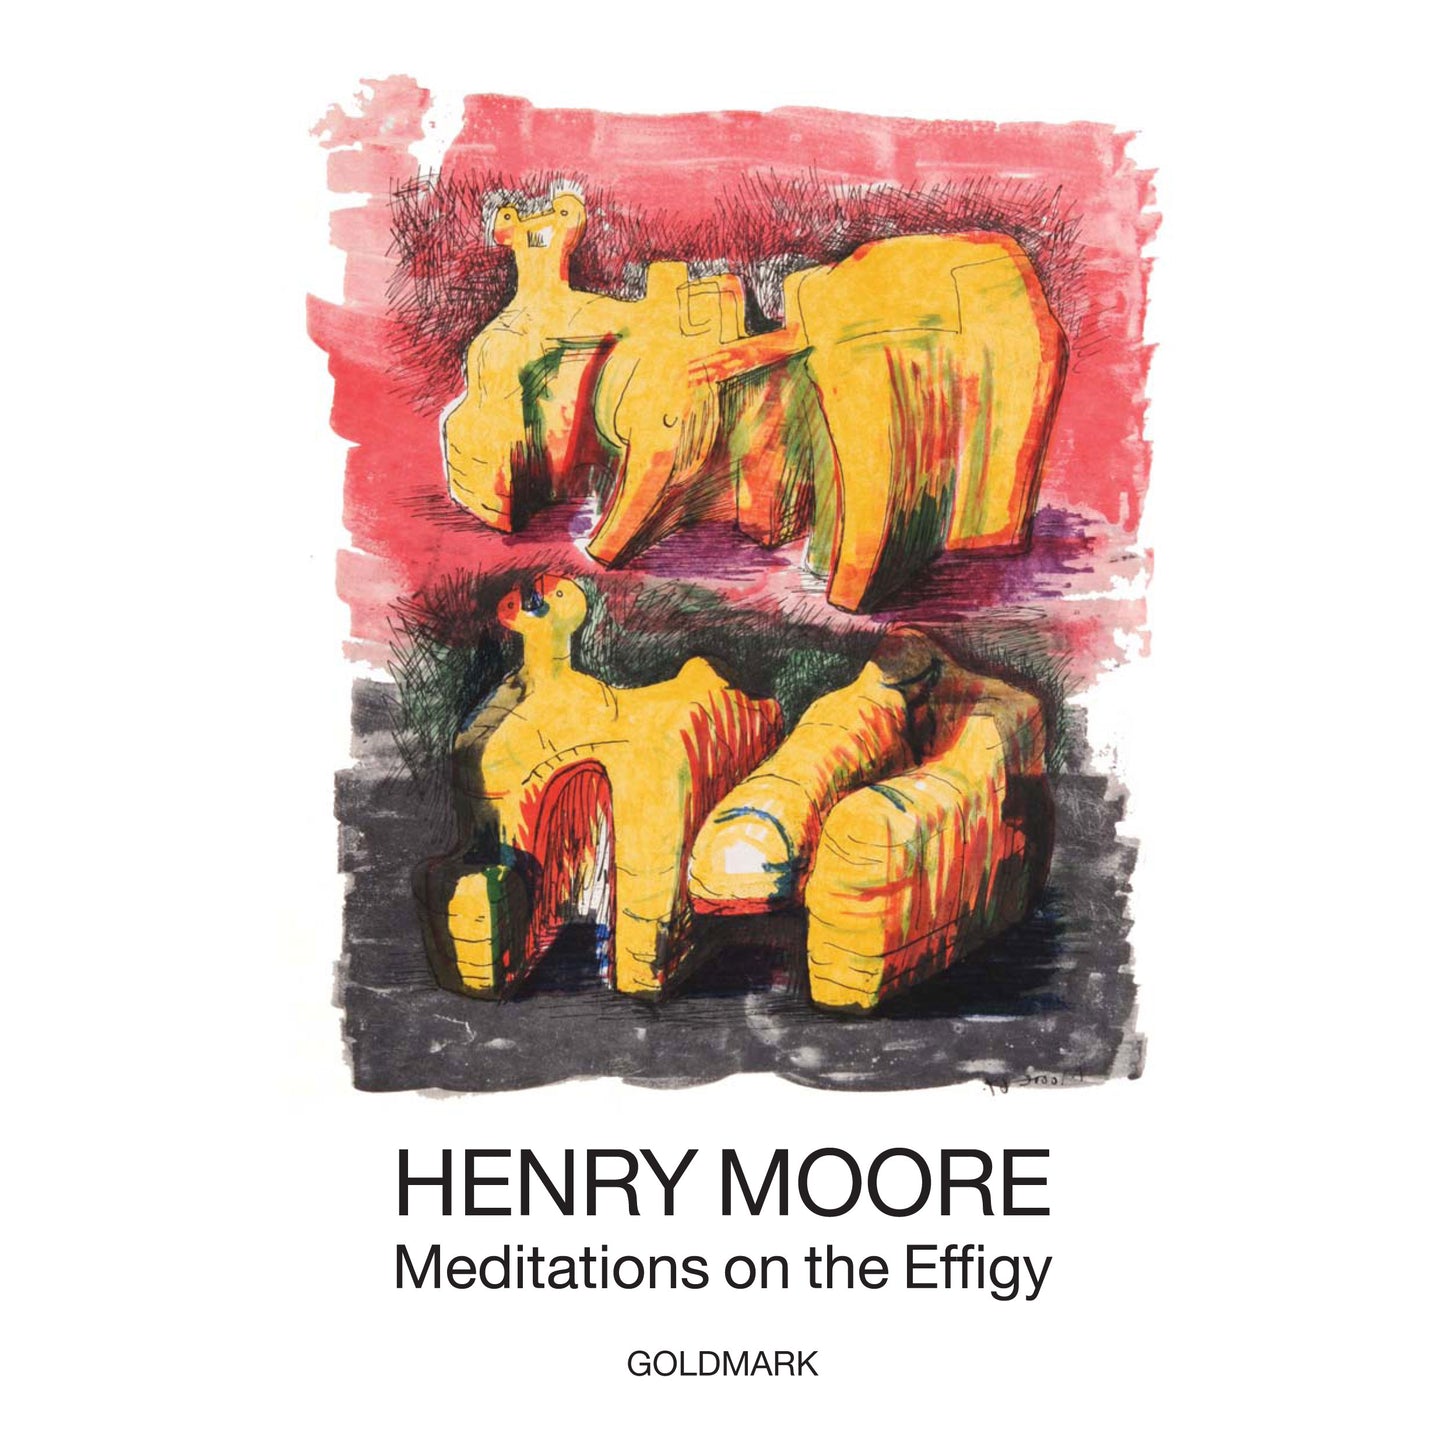 Henry Moore - Meditations on the Effigy